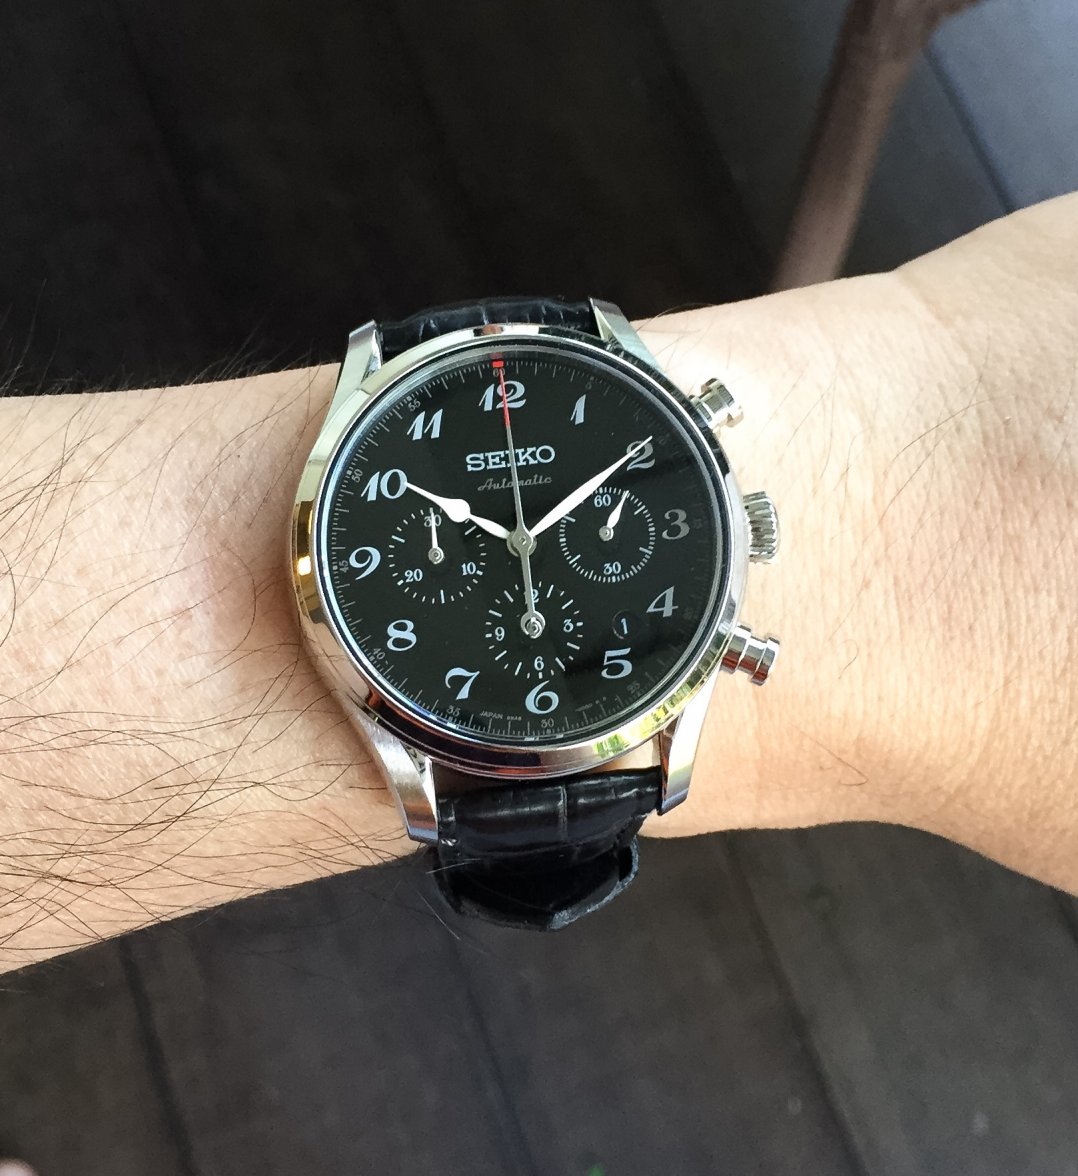 Opinion - Whats Your Favorite Chronograph Design | Page 2 | Omega Forums